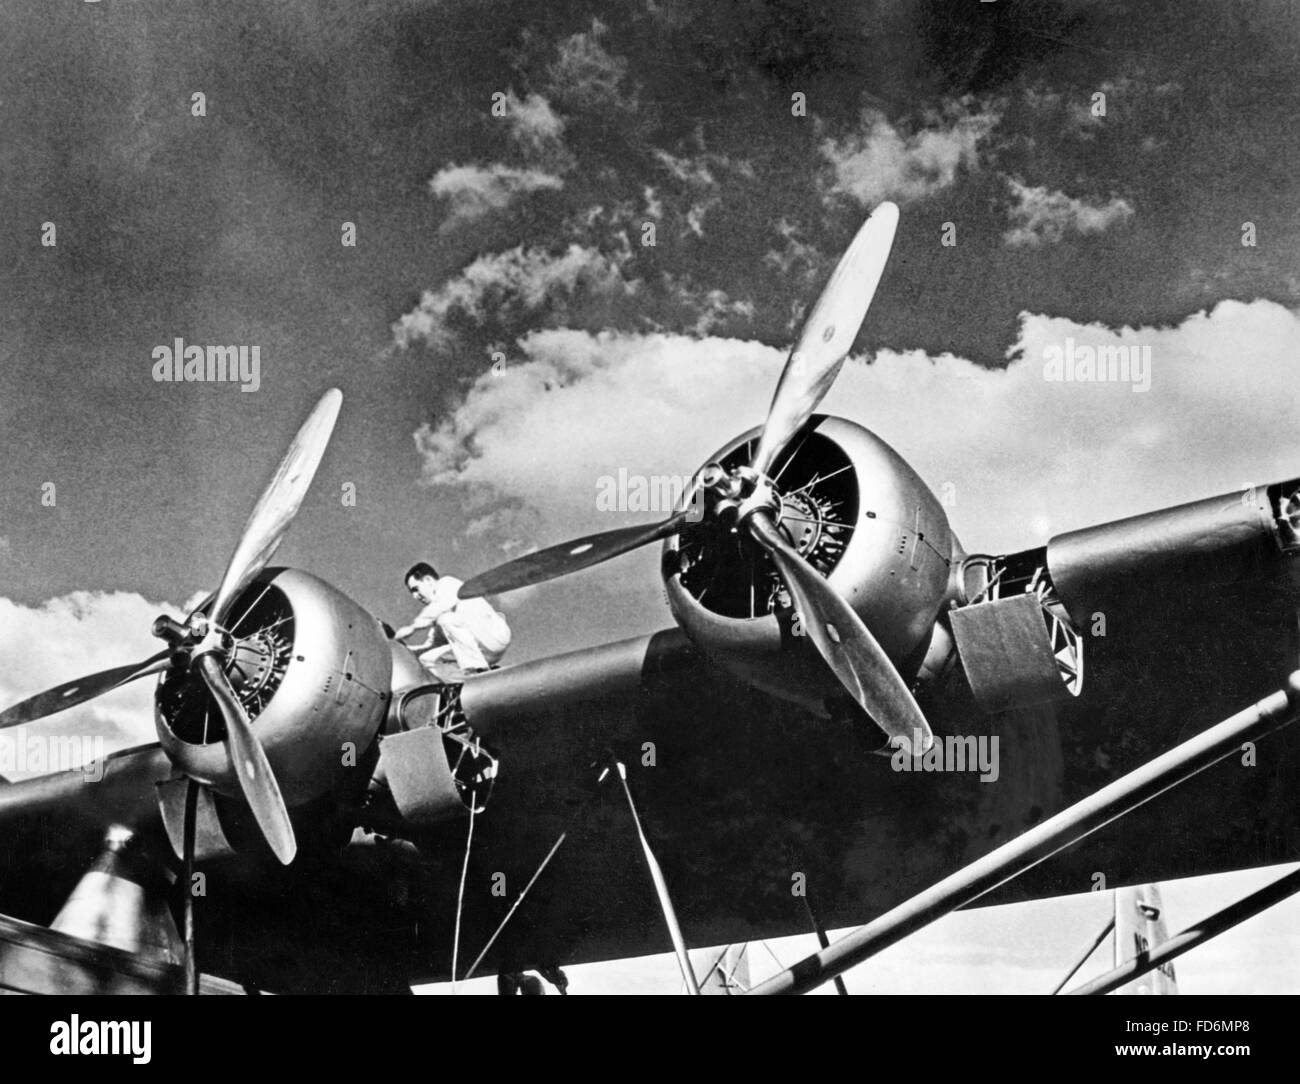 130 carried Black and White Stock Photos & Images - Alamy